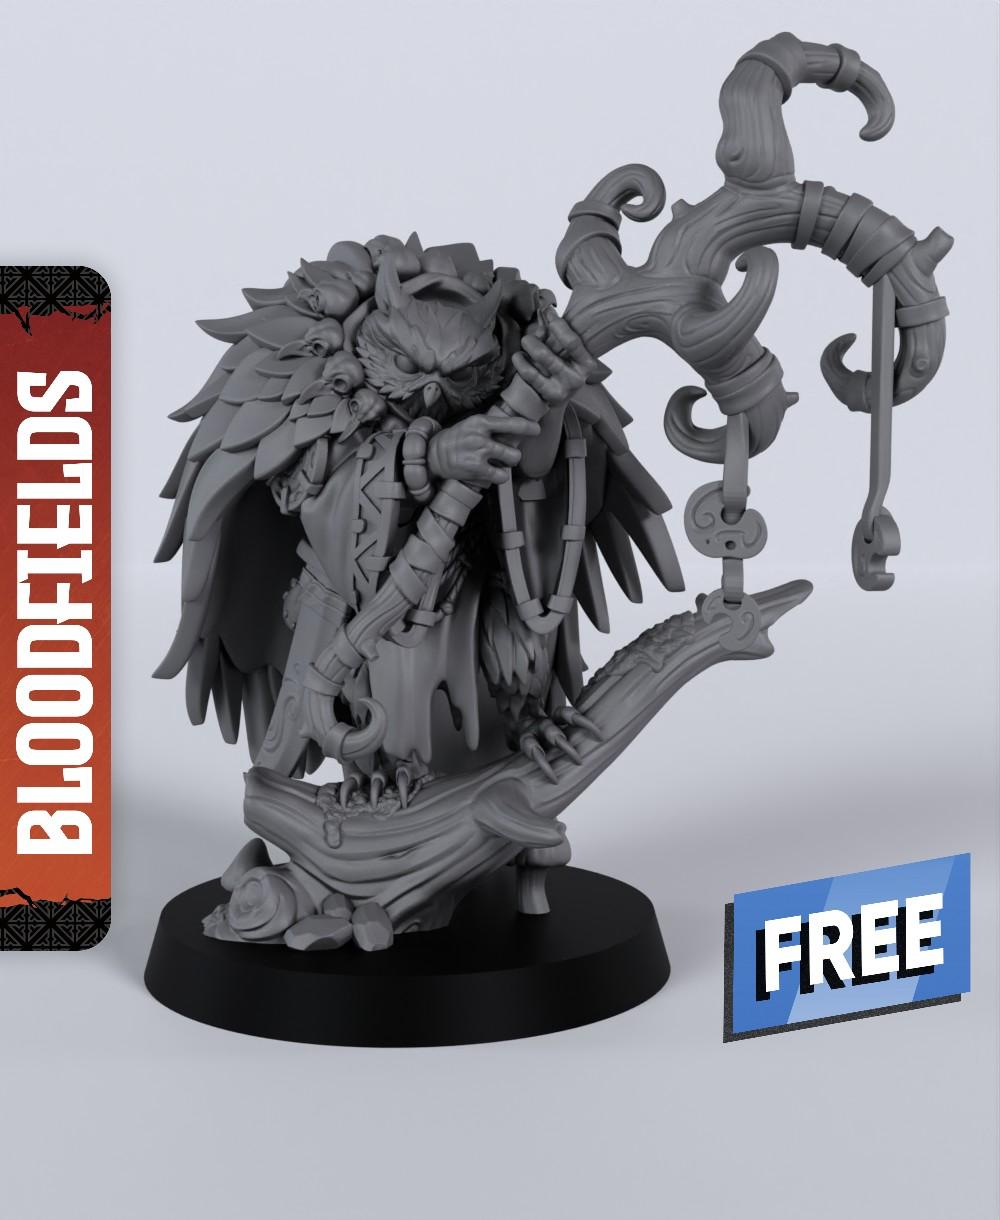 Burwing - With Free Dragon Warhammer - 5e DnD Inspired for RPG and Wargamers 3d model